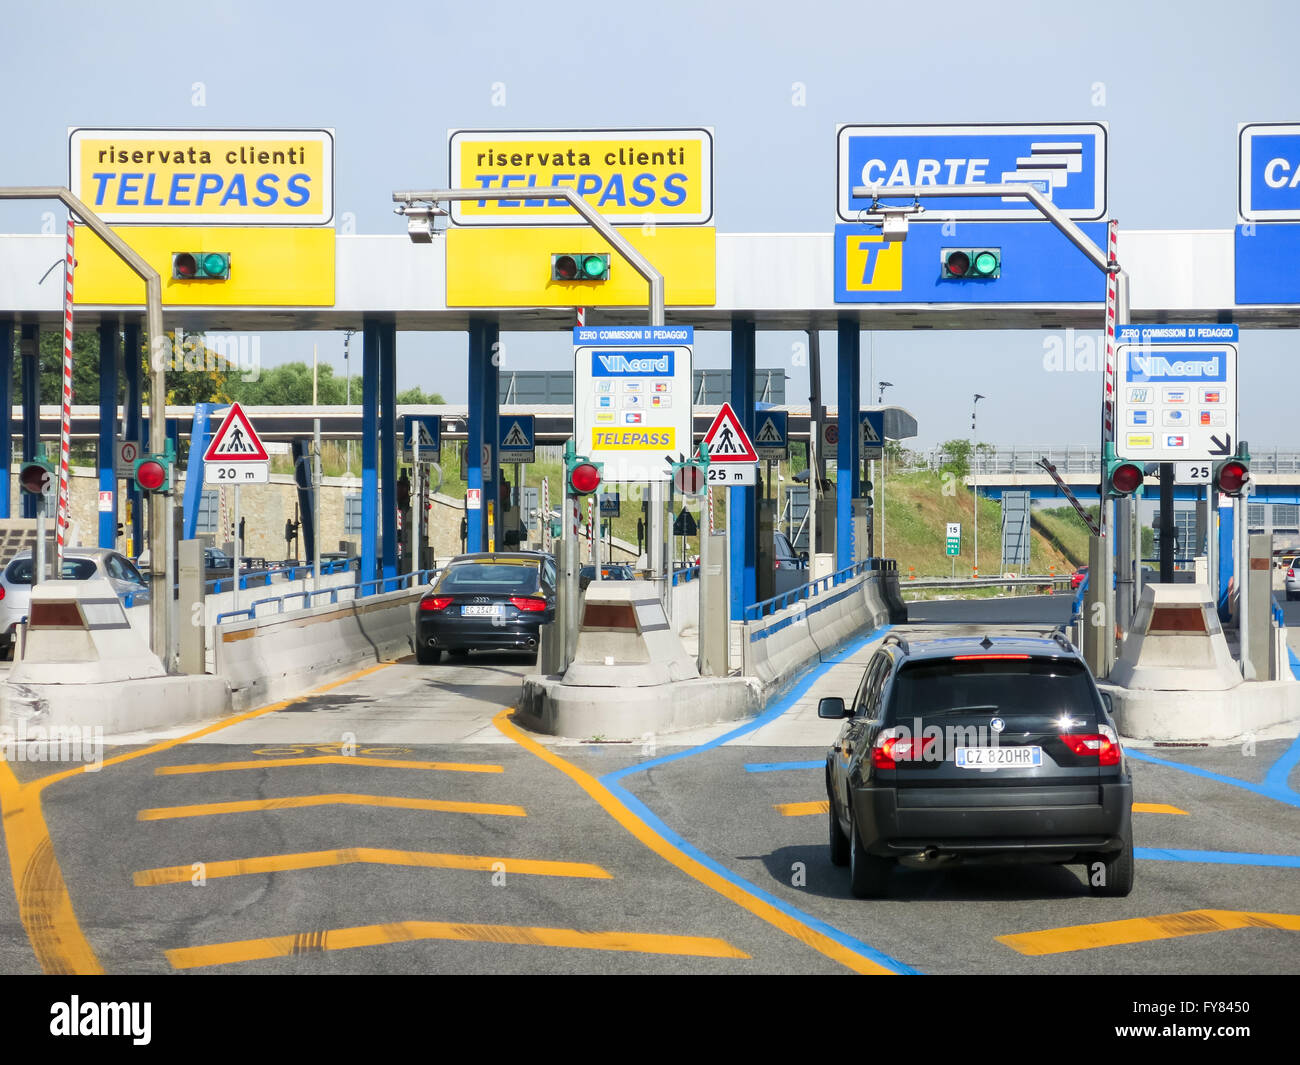 Telepass High Resolution Stock Photography and Images - Alamy